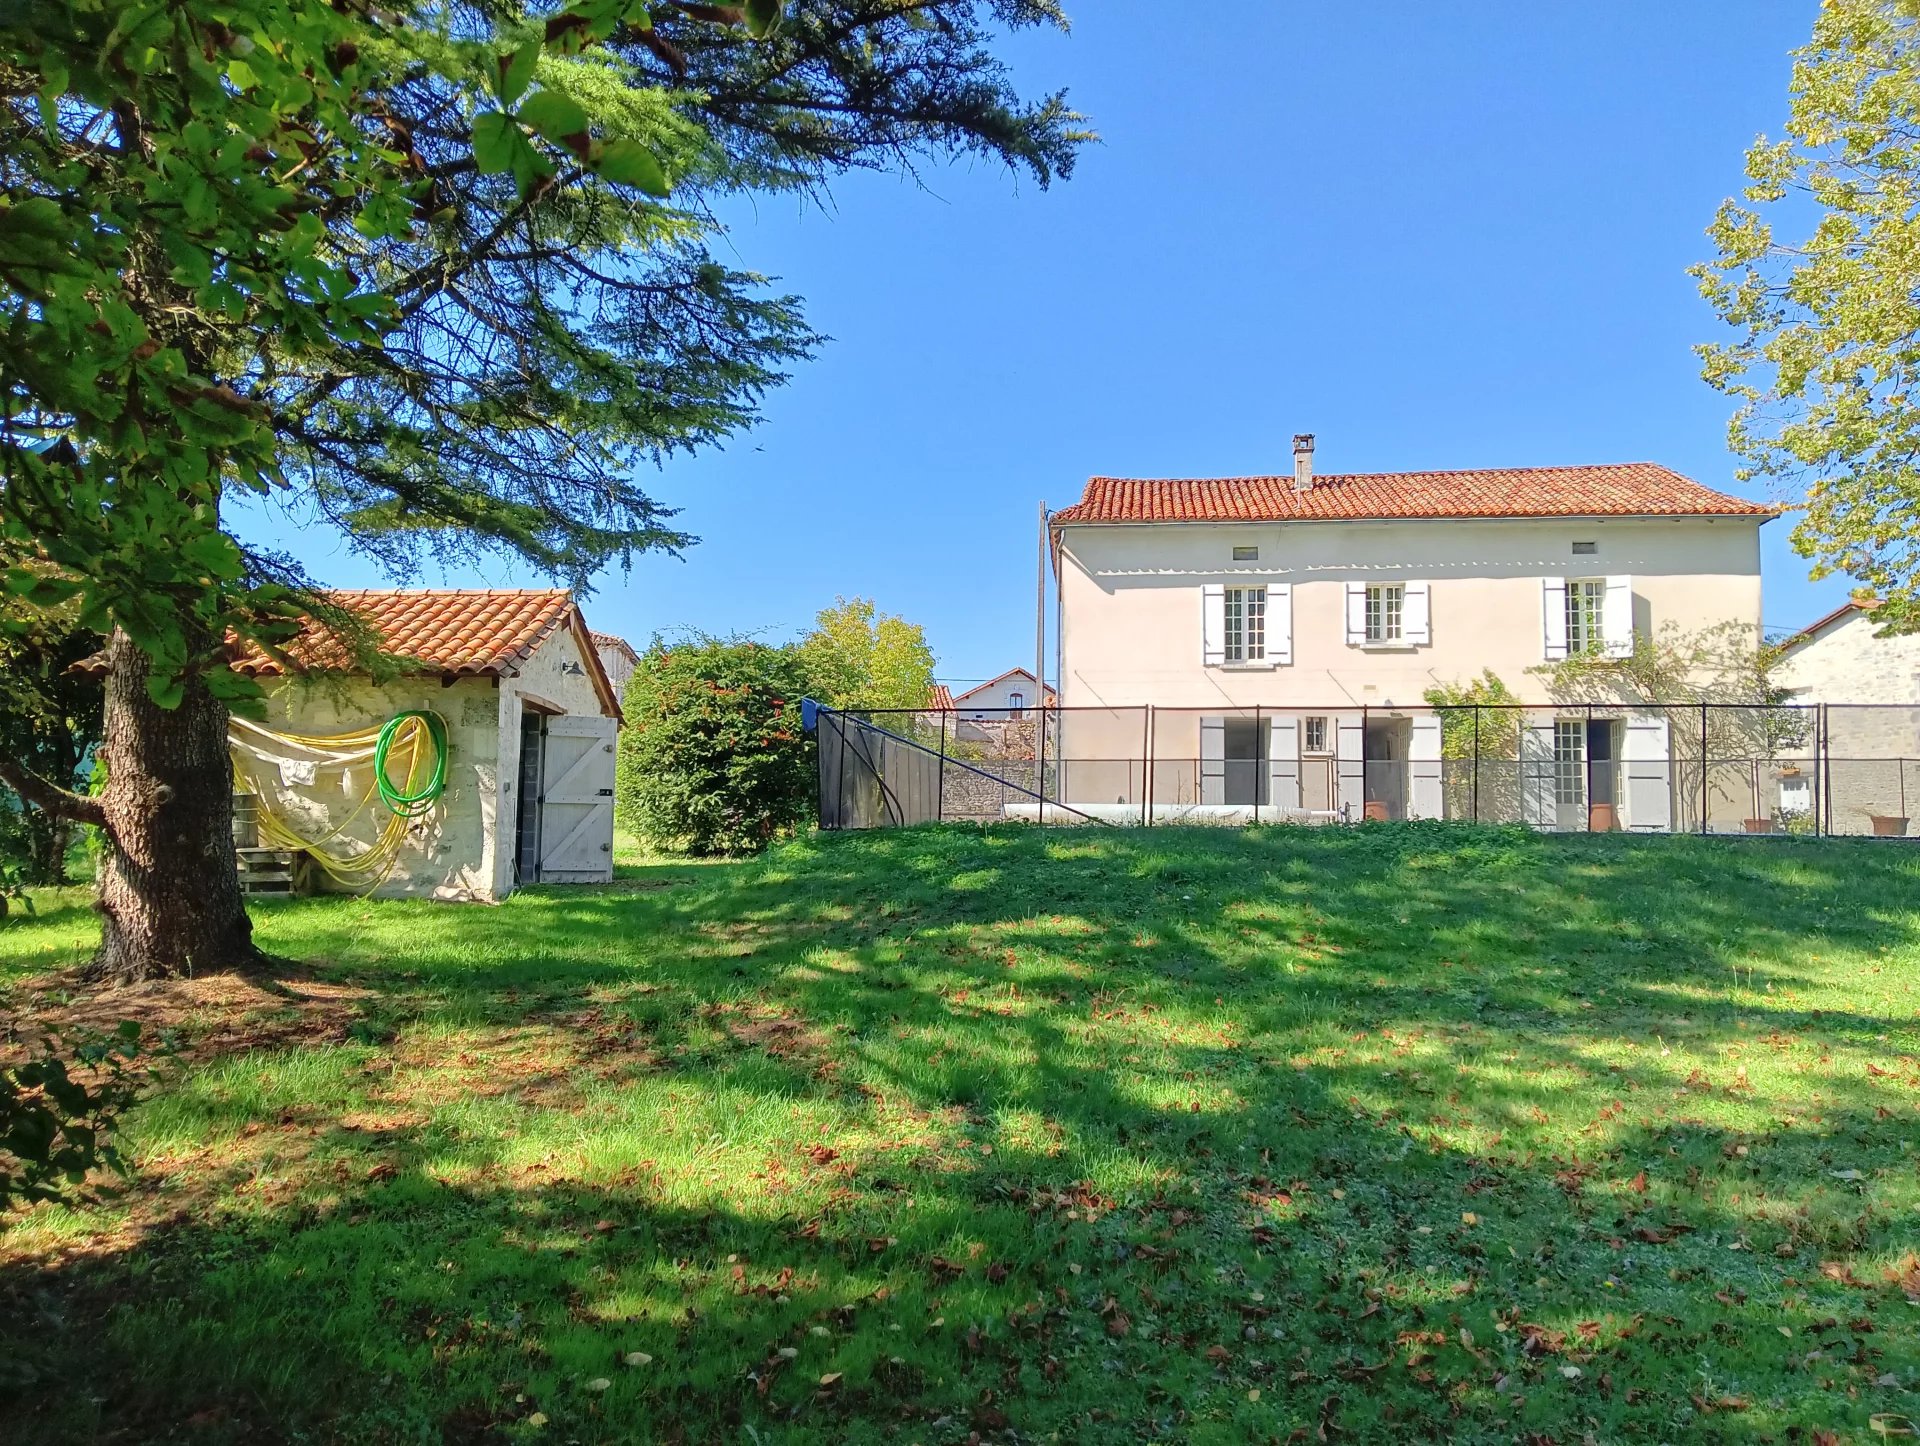 2 houses, swimming pool and dovecote in the countryside